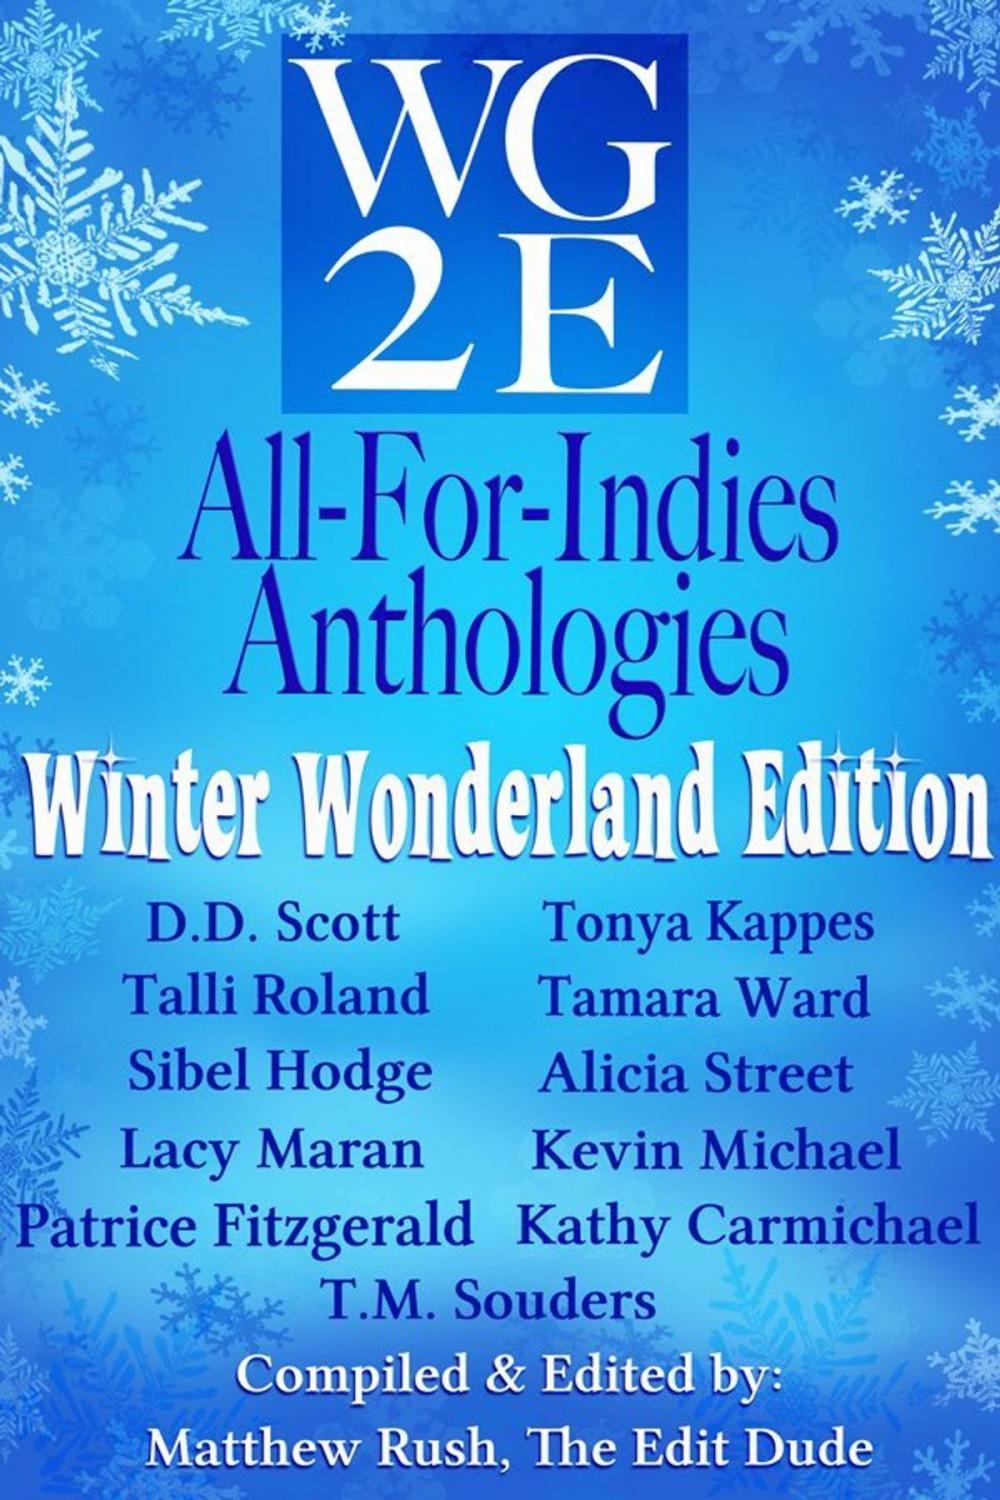 Big bigCover of The WG2E All-For-Indies Anthologies: Winter Wonderland Edition